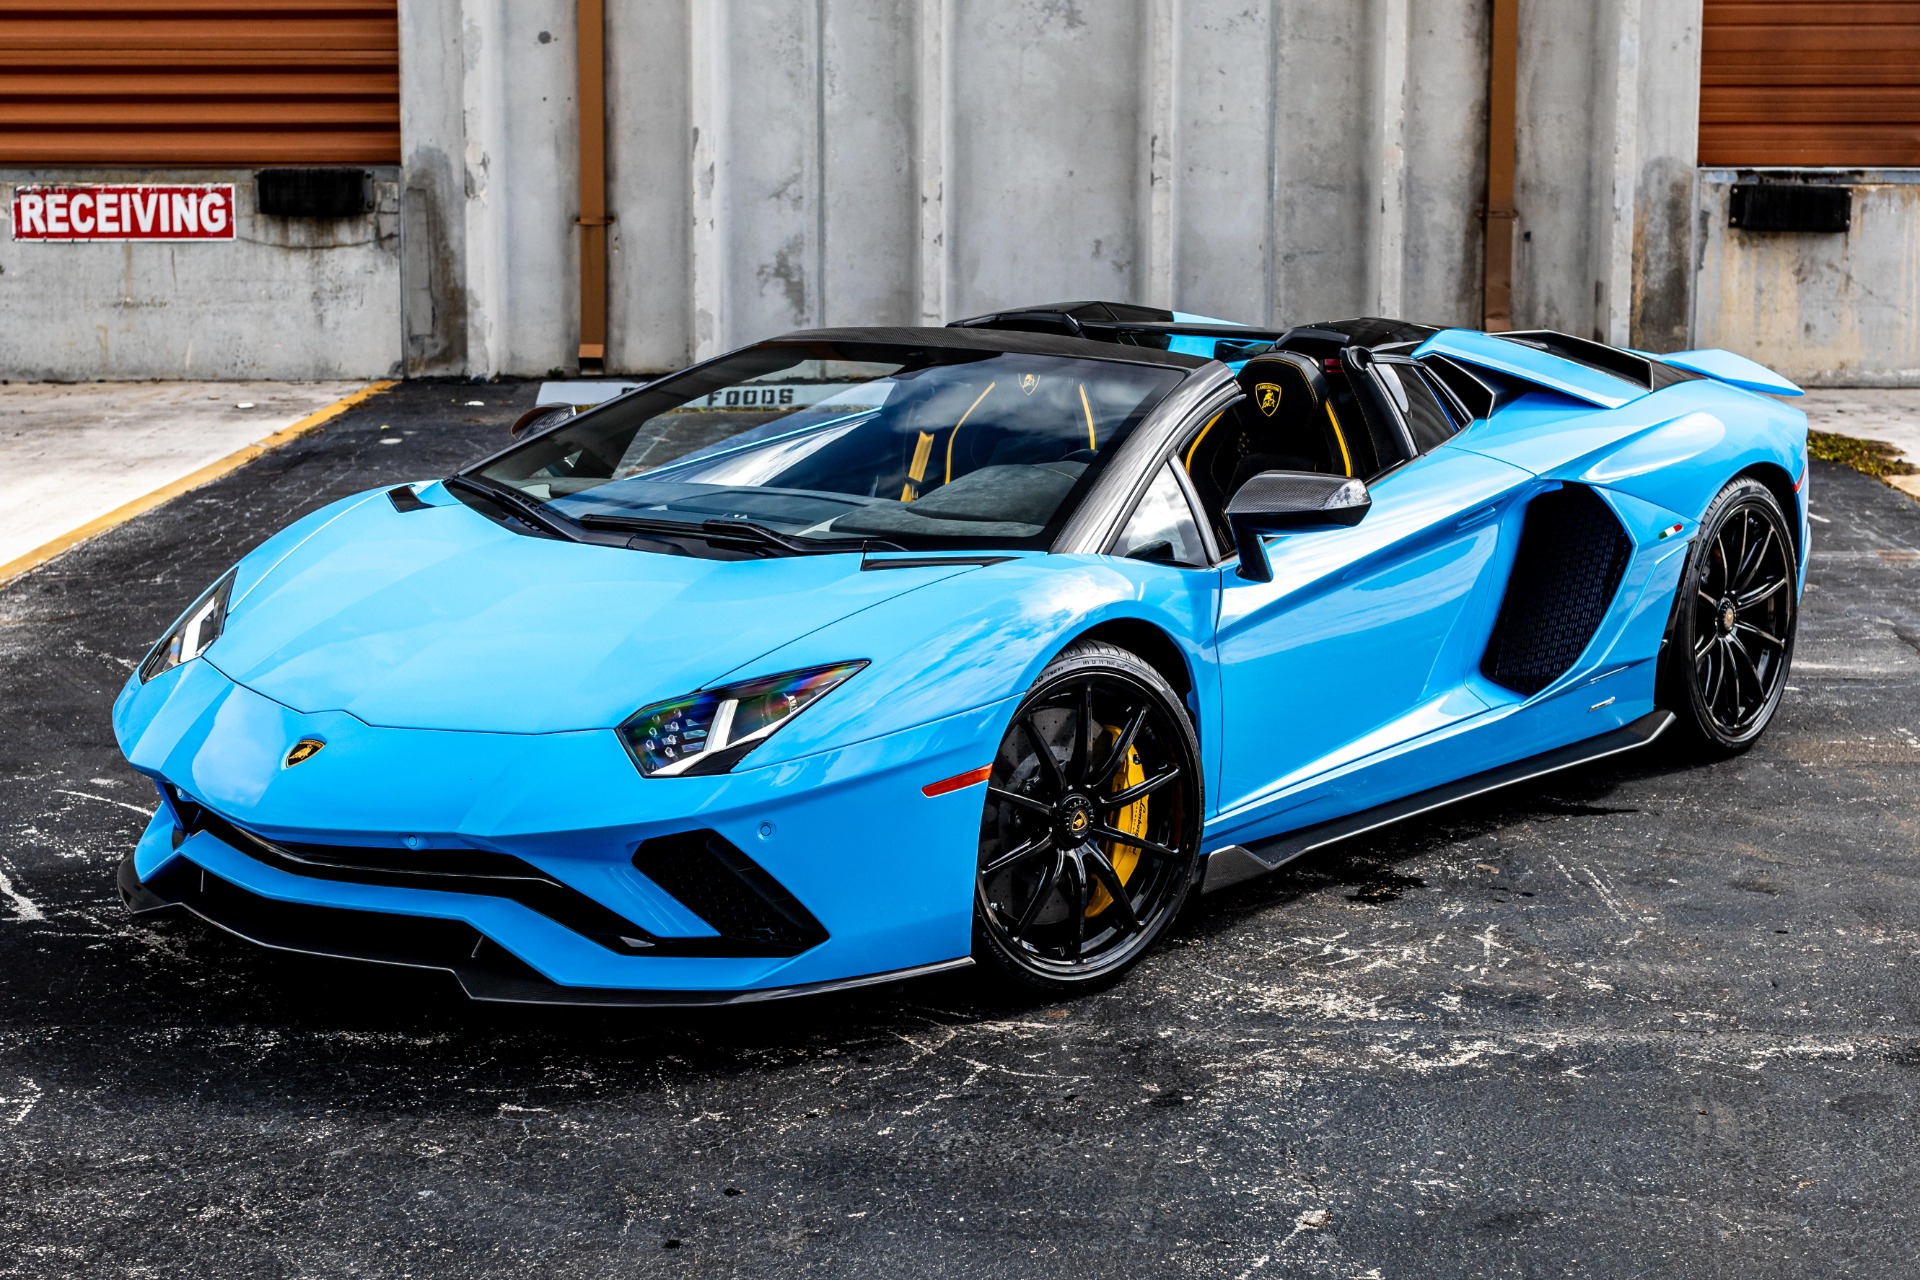 Used 2022 Lamborghini Aventador LP 780-4 Ultimae Roadster w/ $90K in  Options, Full PPF For Sale (Sold) | Exotics Hunter Stock #A11507